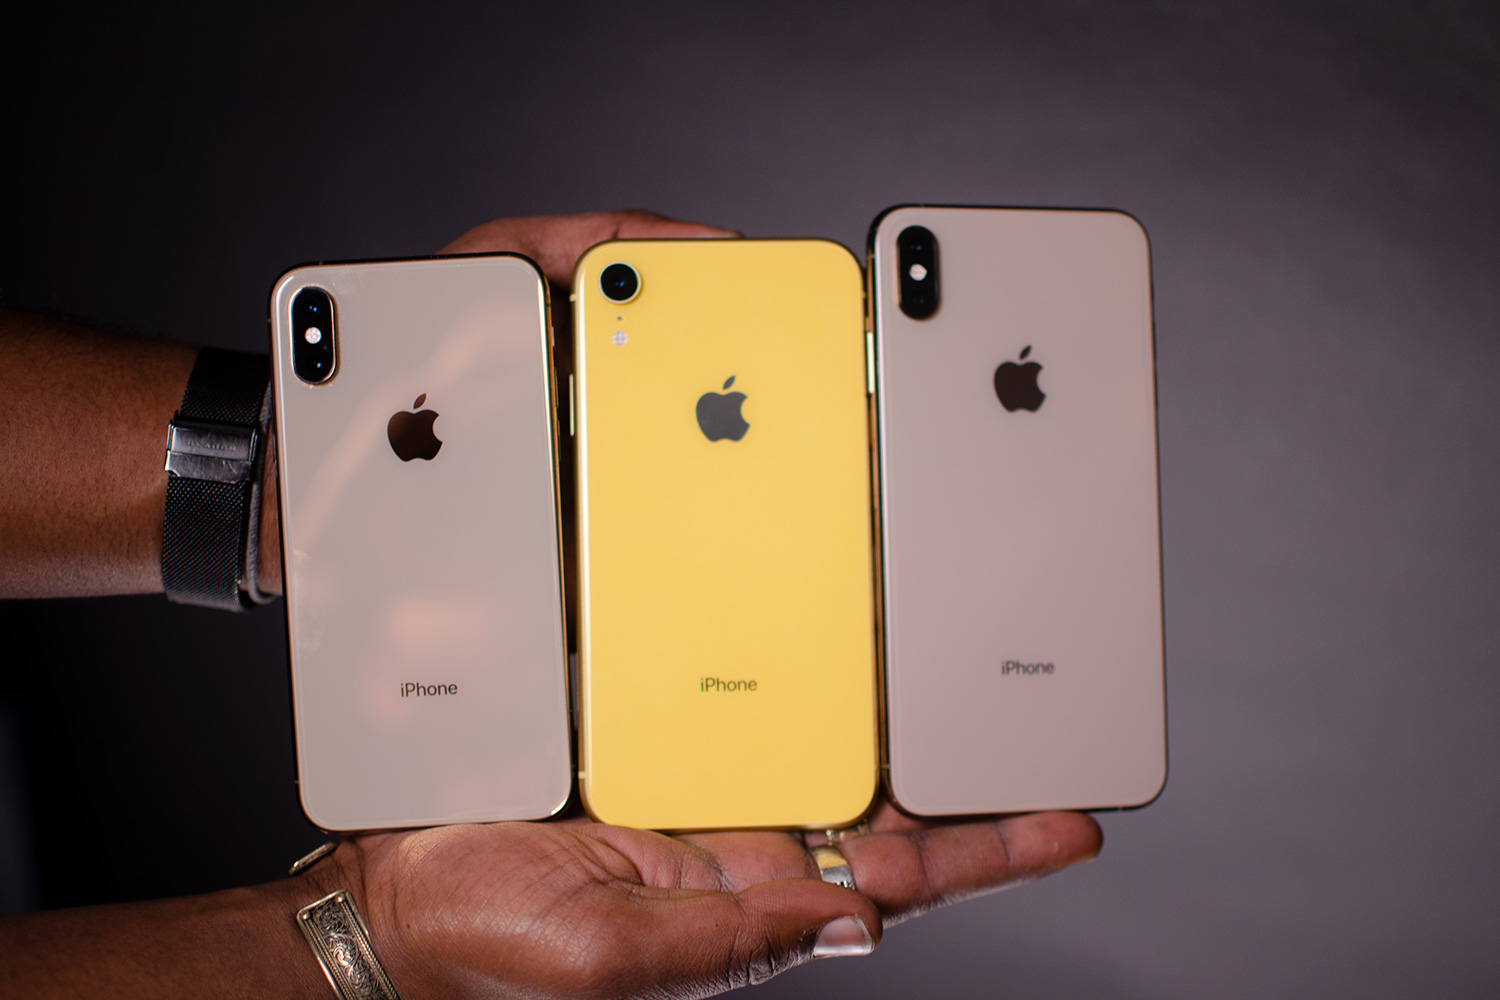 iPhone XR, iPhone XS Max, and iPhone XS Tips and Tricks | Digital